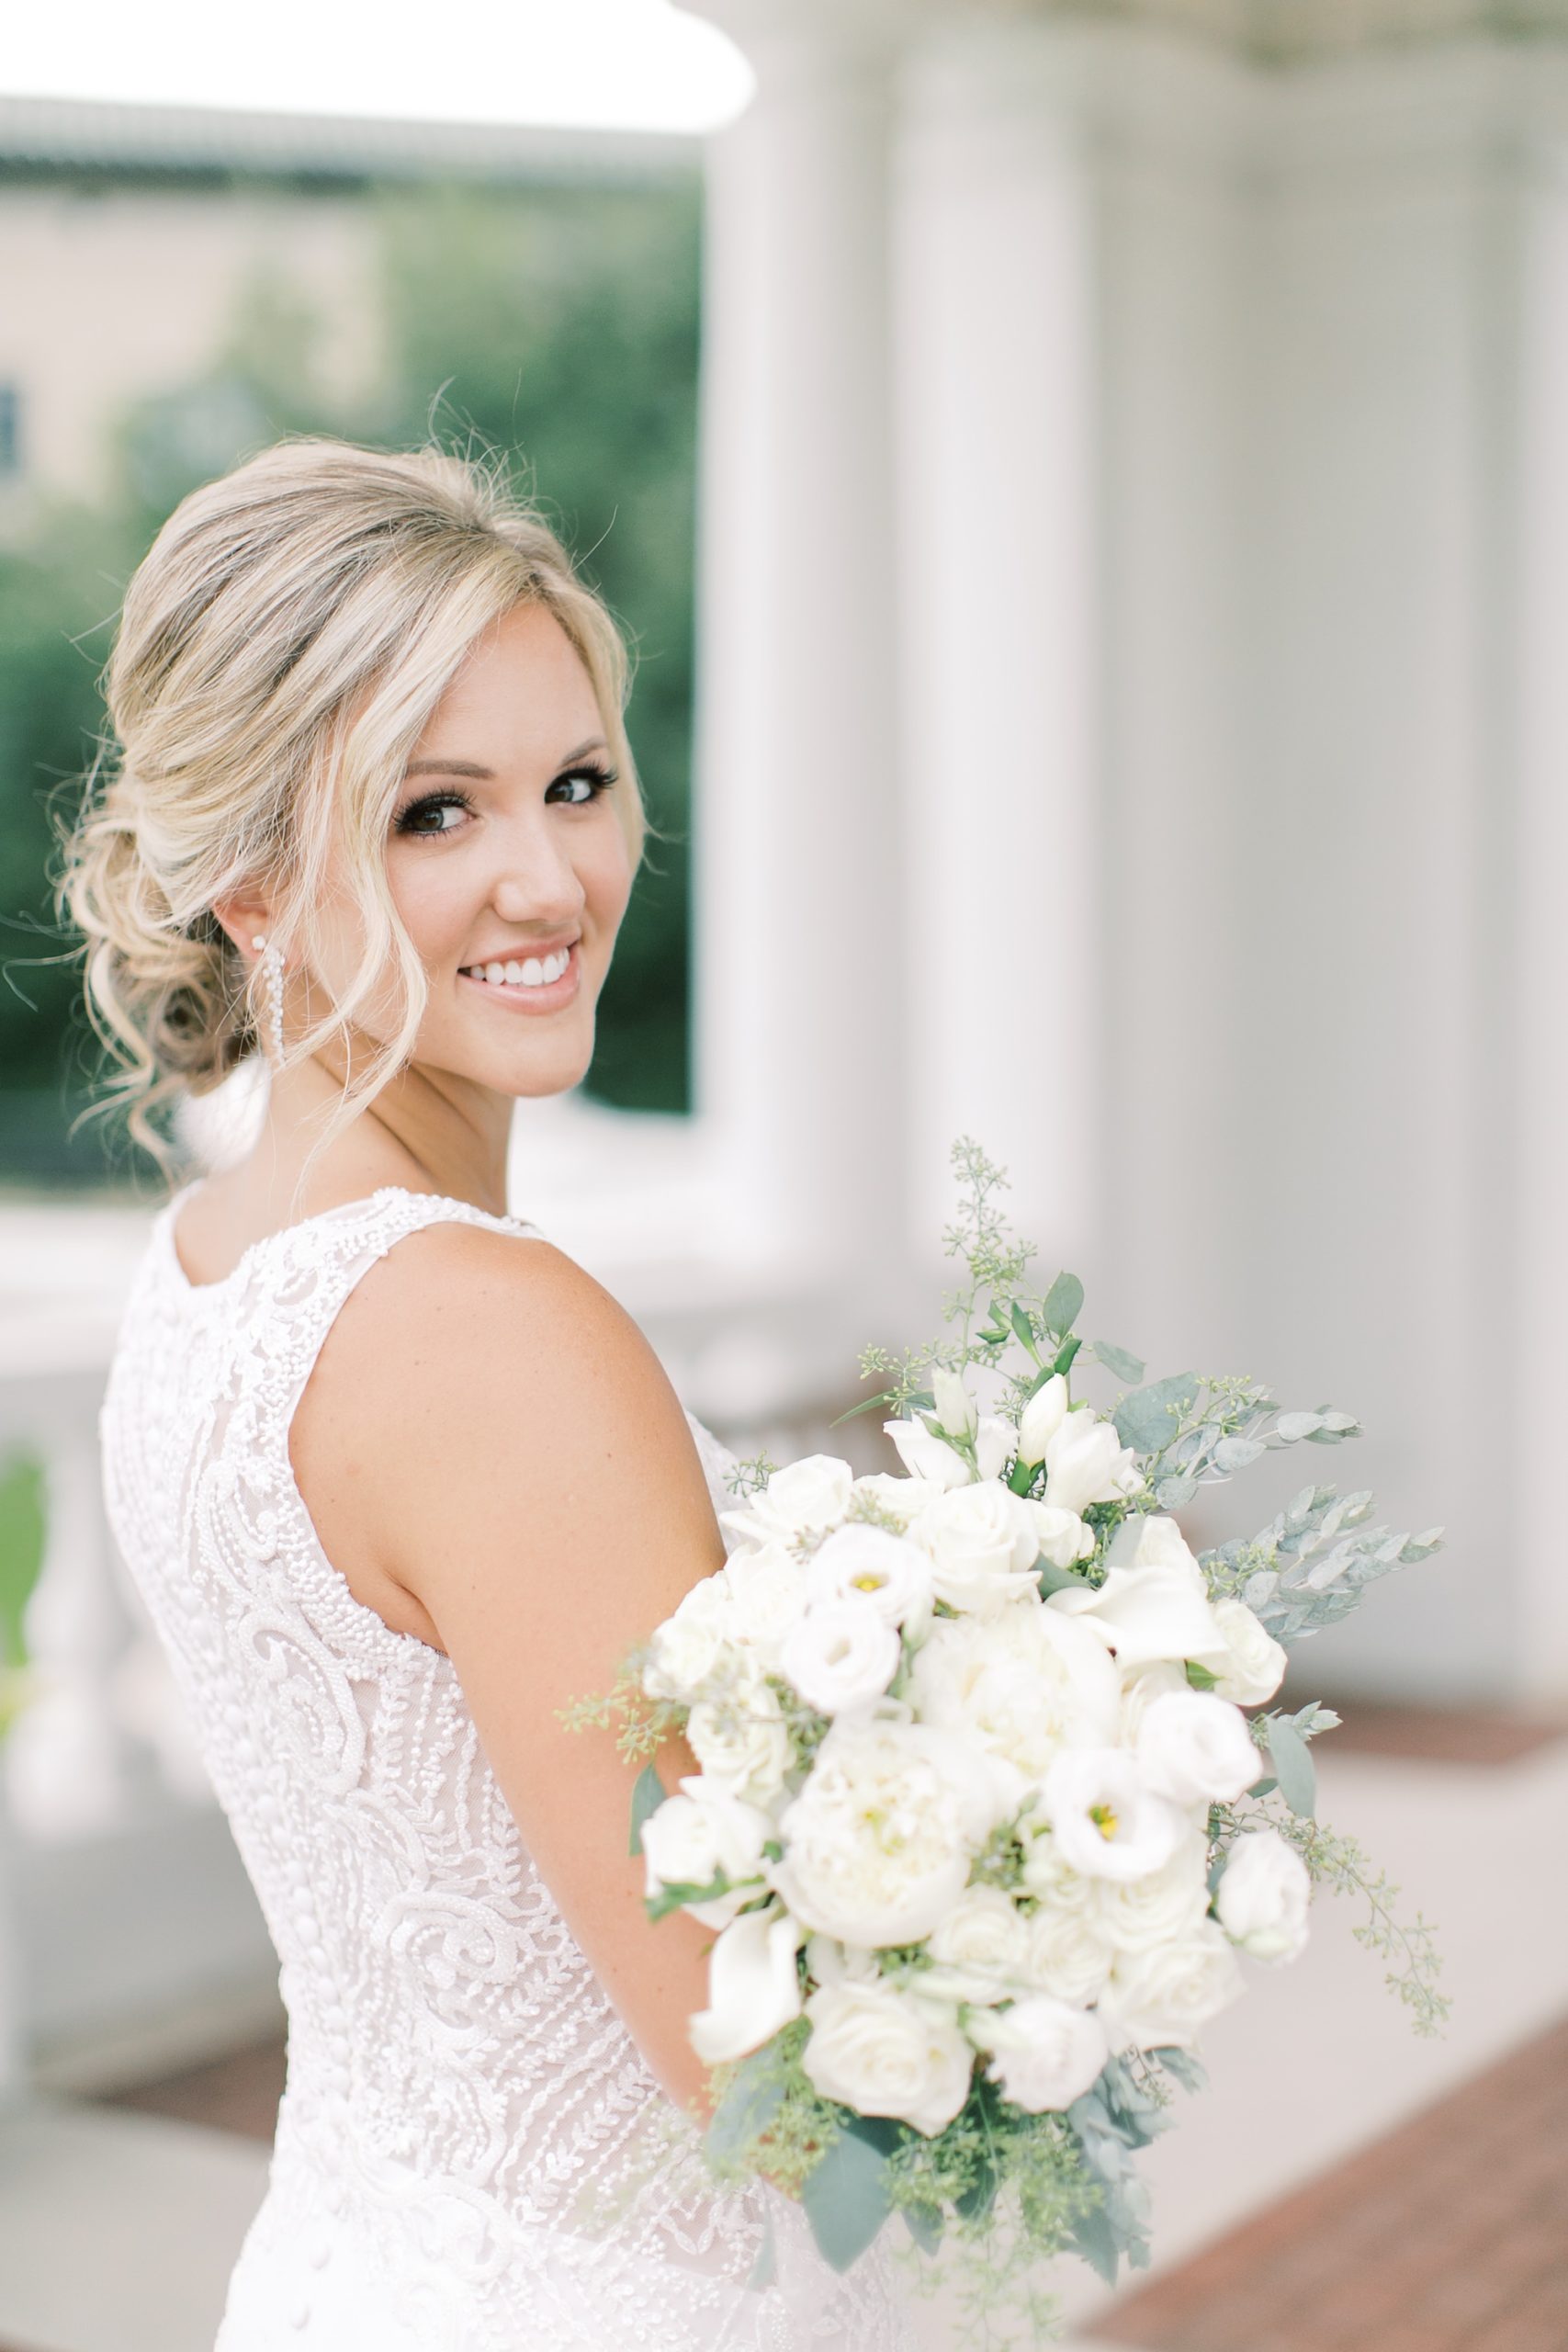 wife holds bouquet of white flowers and looks over shoulder during anniversary photos